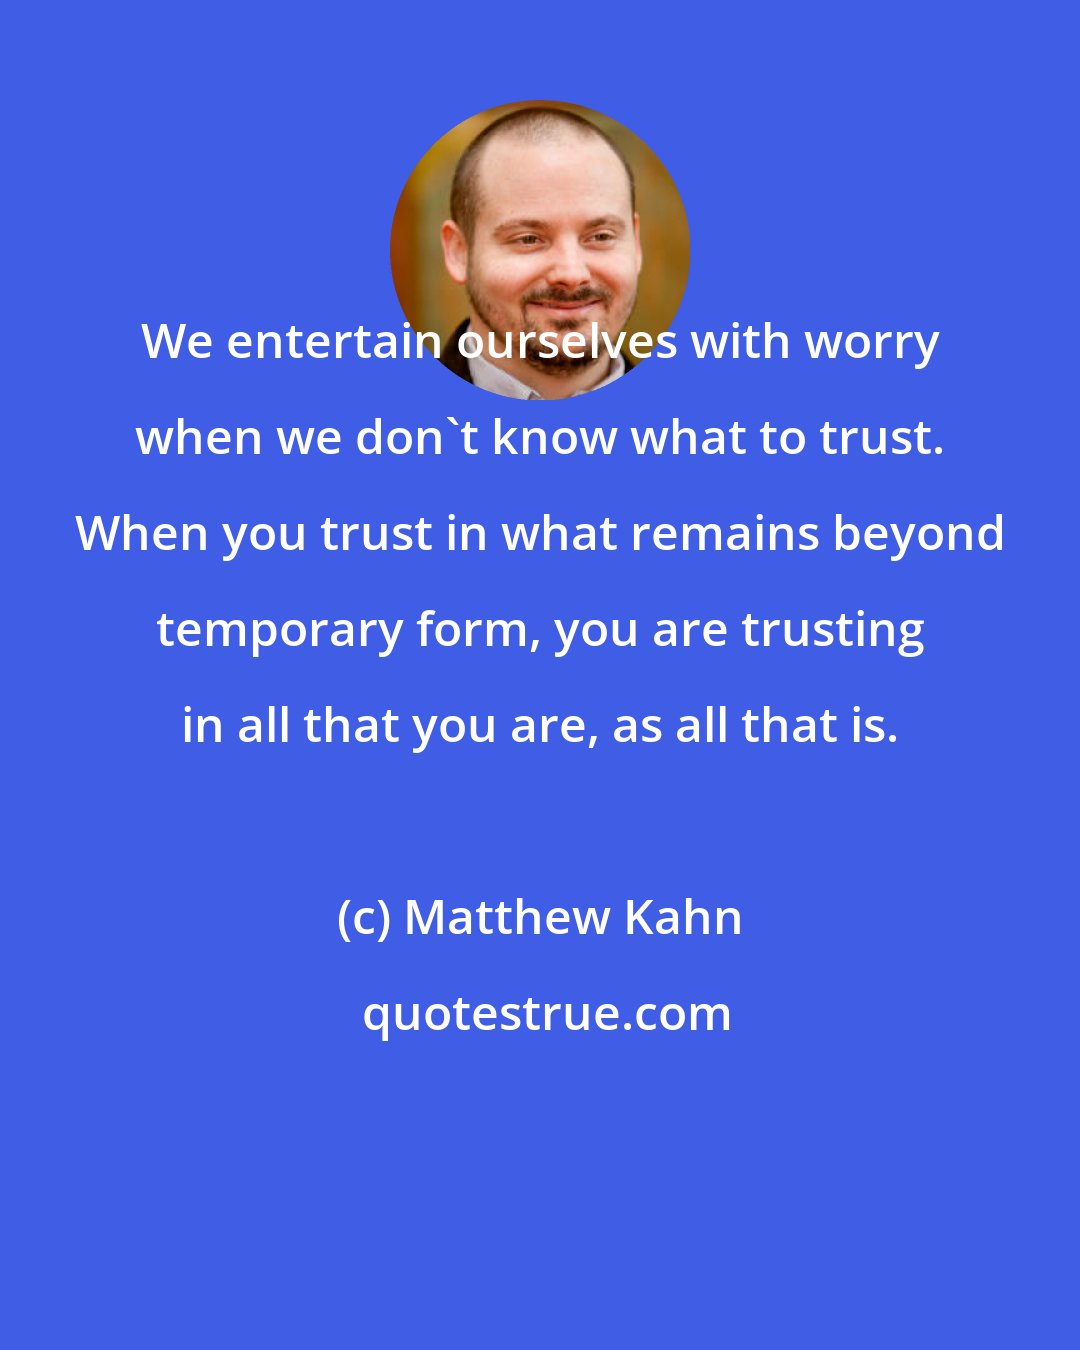 Matthew Kahn: We entertain ourselves with worry when we don't know what to trust. When you trust in what remains beyond temporary form, you are trusting in all that you are, as all that is.